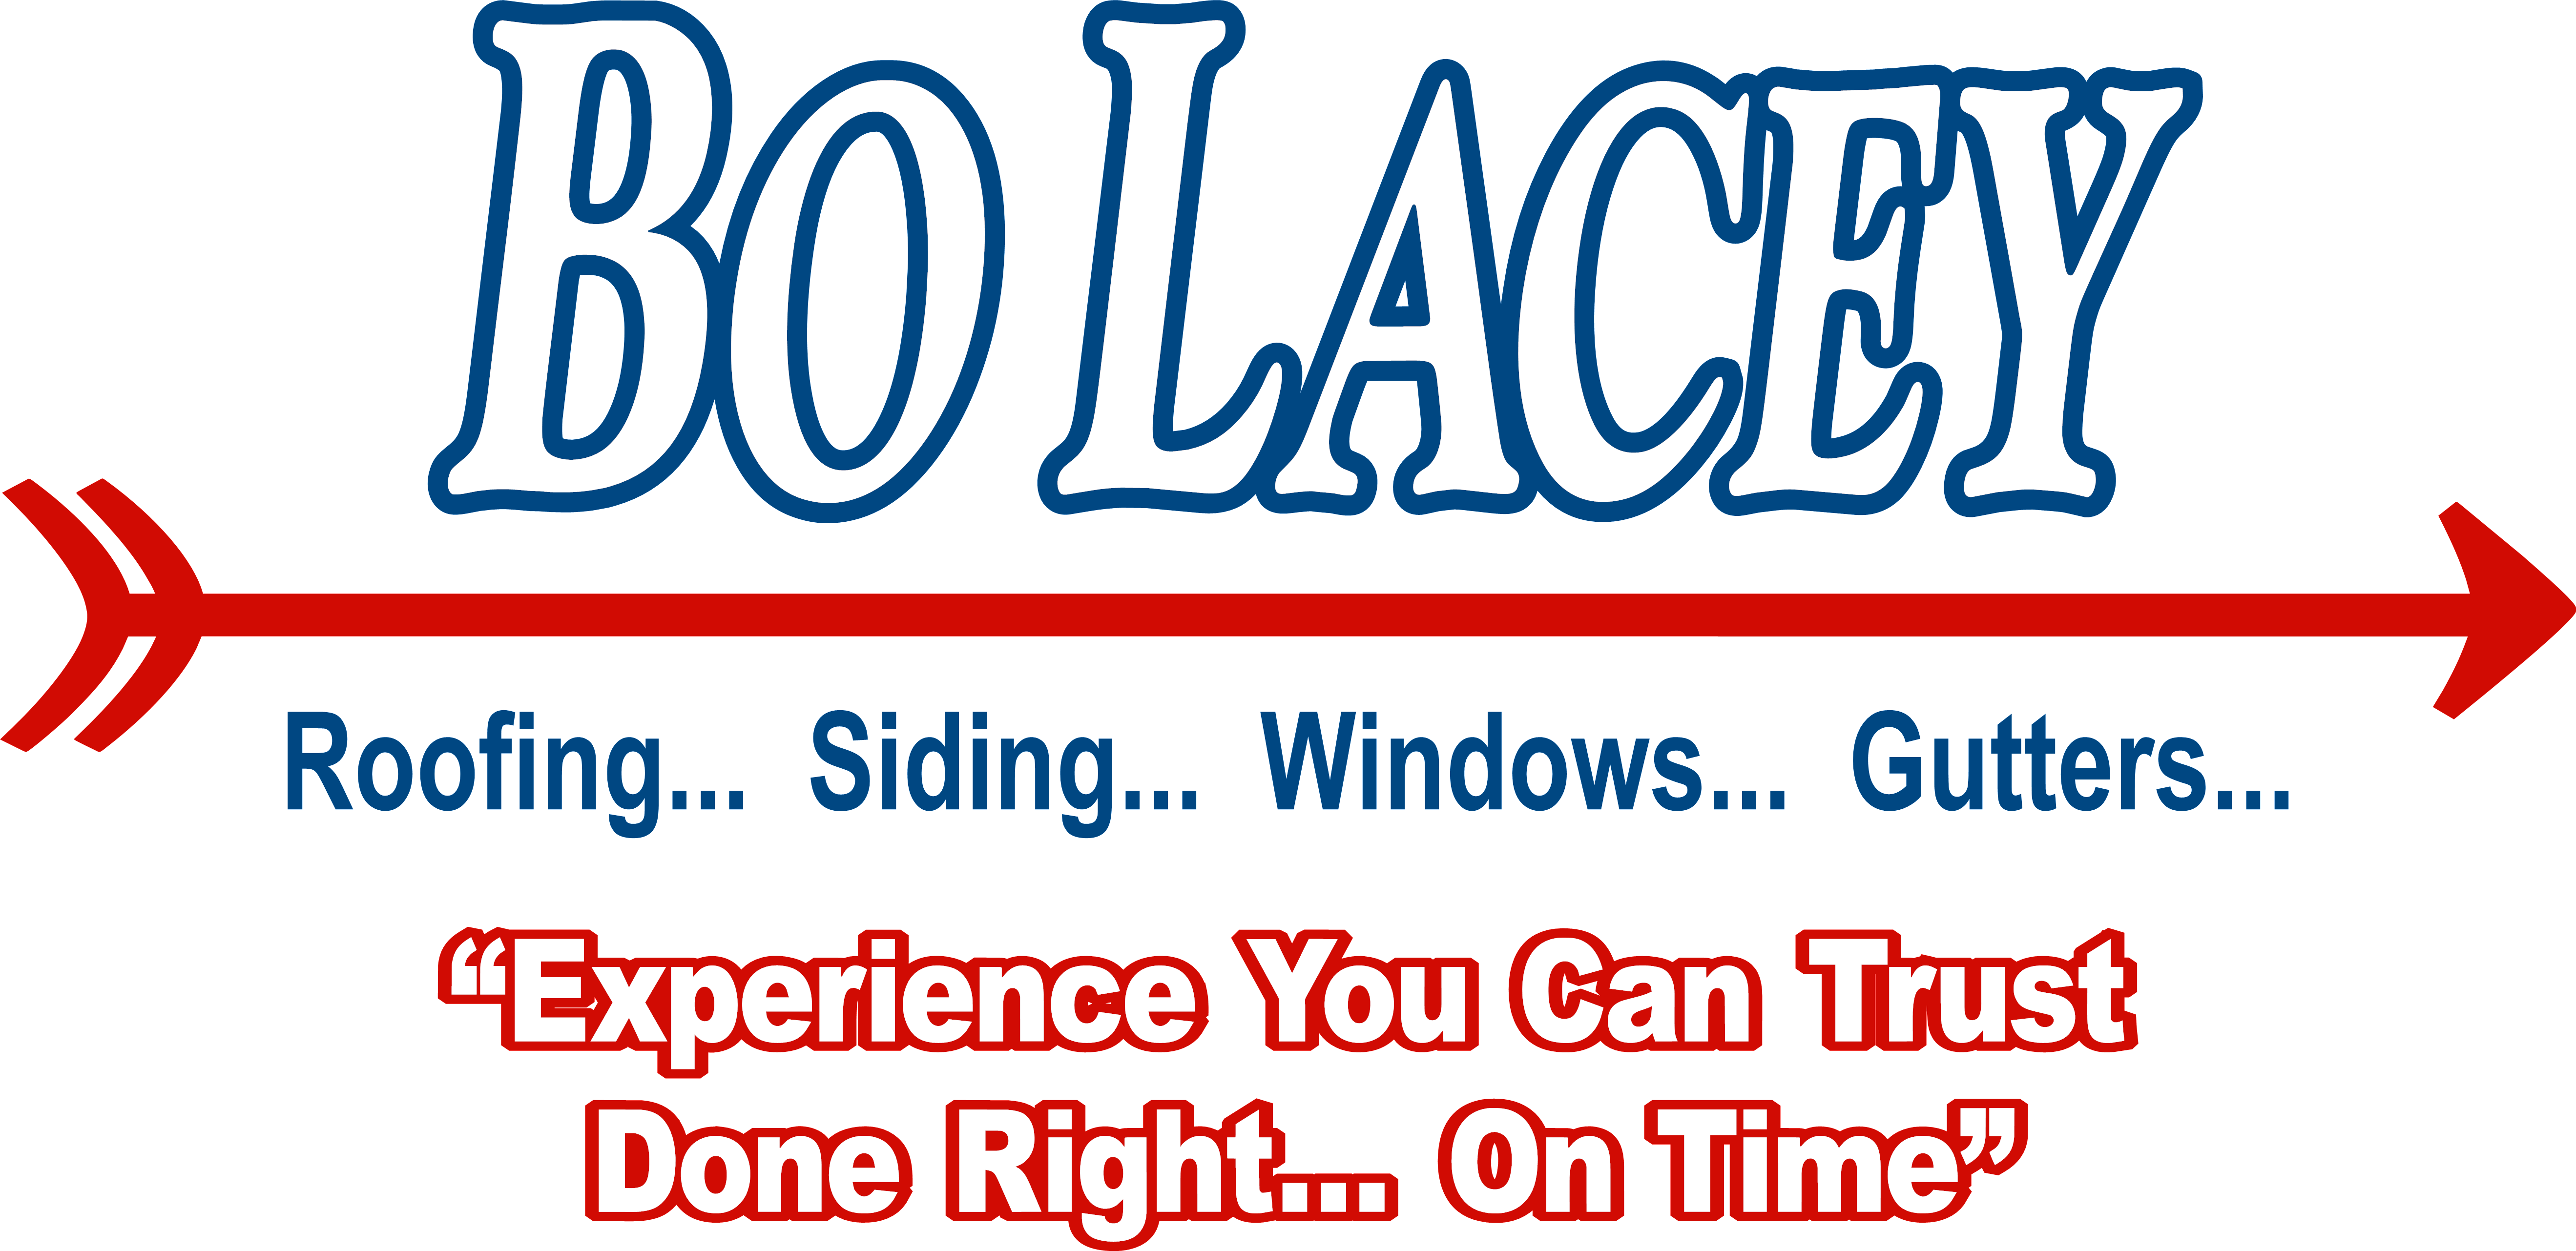 Bo Lacey Construction